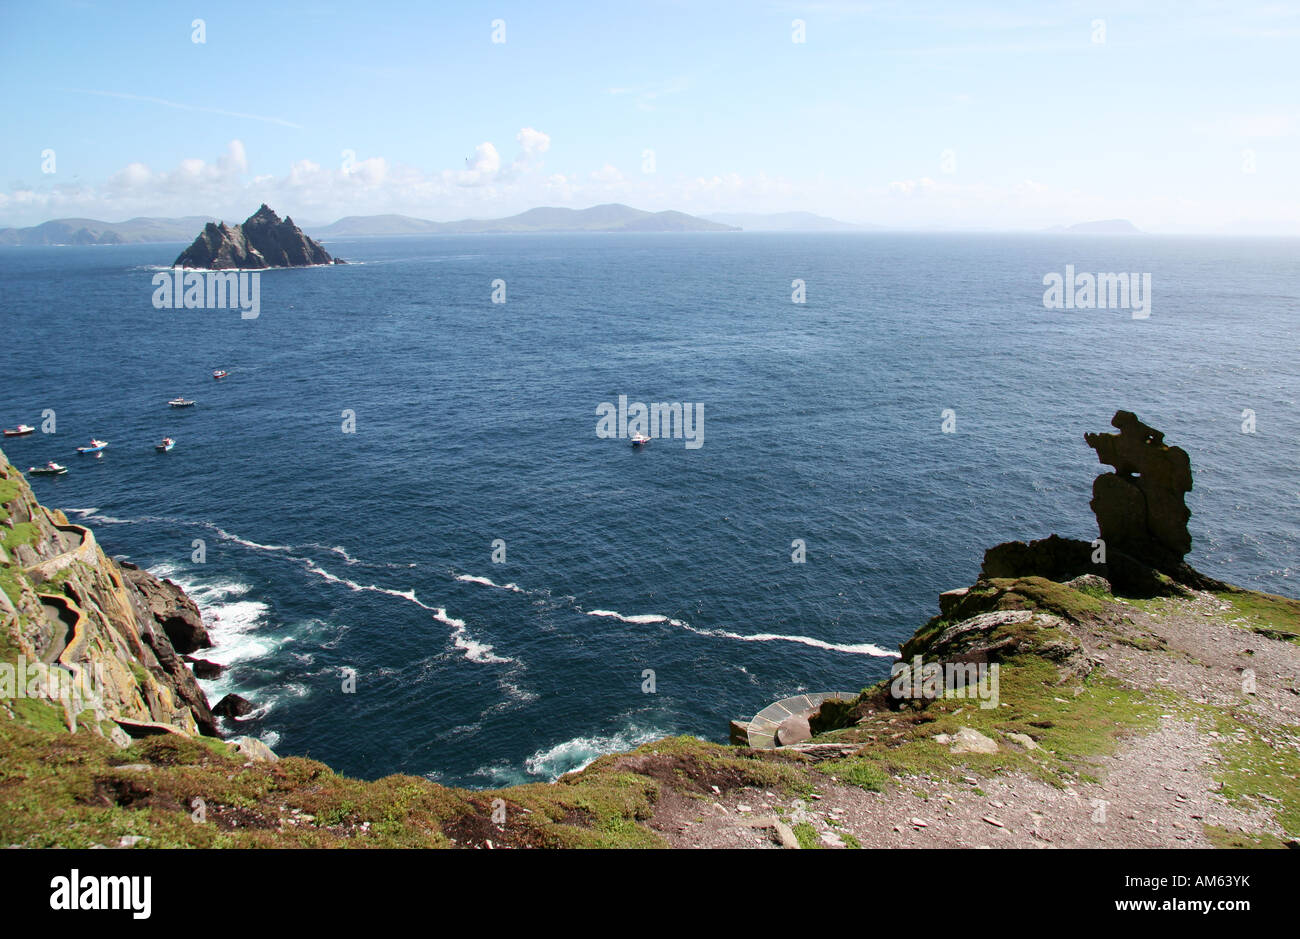 View from the island Skellig Michael to the neighbour island Little Skellig, Skelligs Islands, Ireland Stock Photo